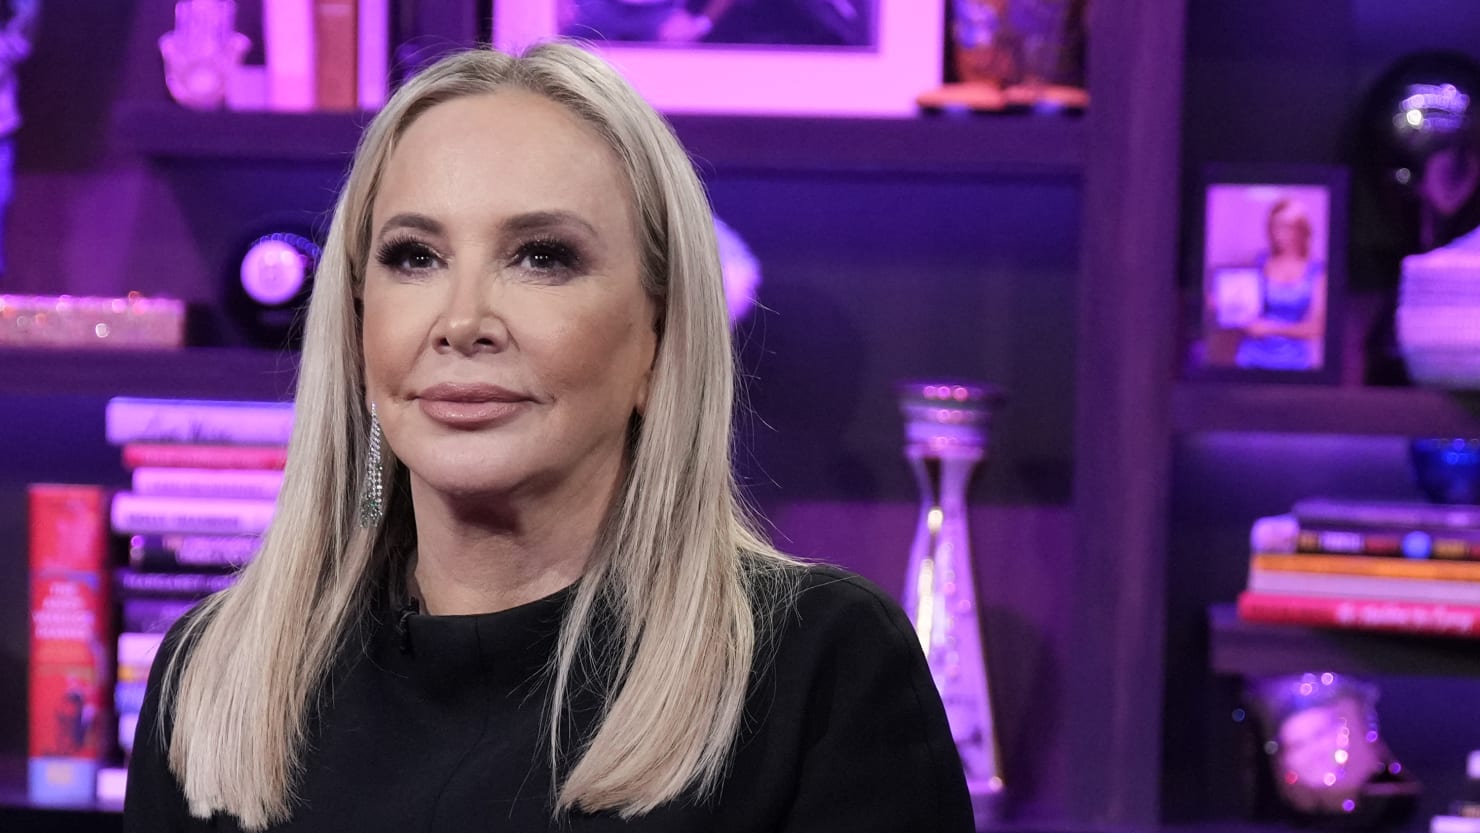 RHOC Star Is Extremely Apologetic After DUI Hit-and-Run, Lawyer Insists pic